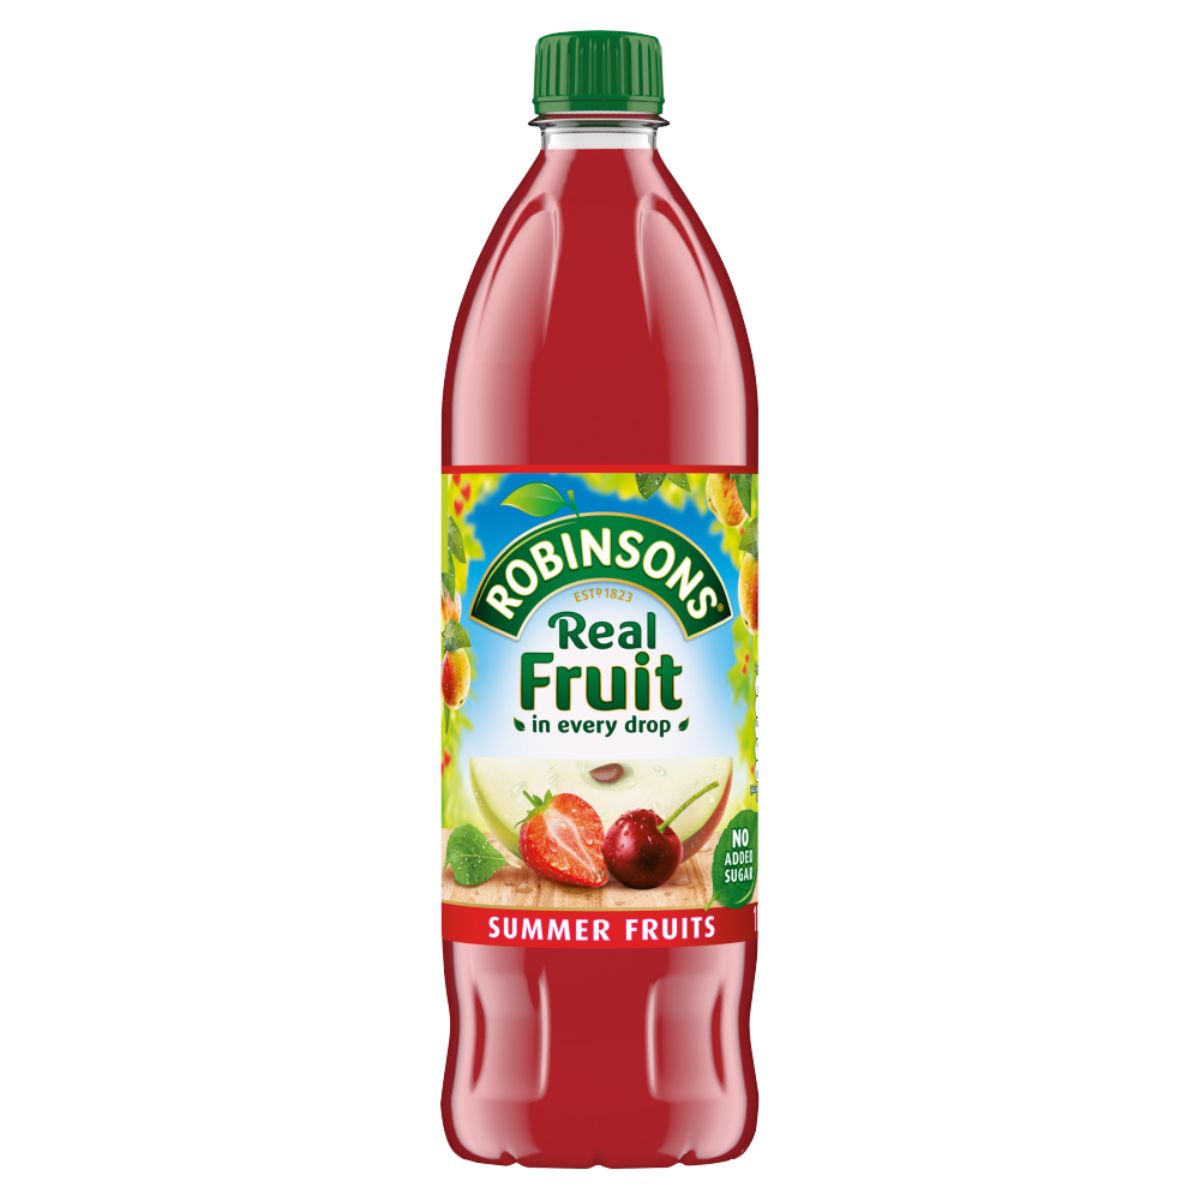 A bottle of Robinson - Real Fruit Summer Fruits - 1L.